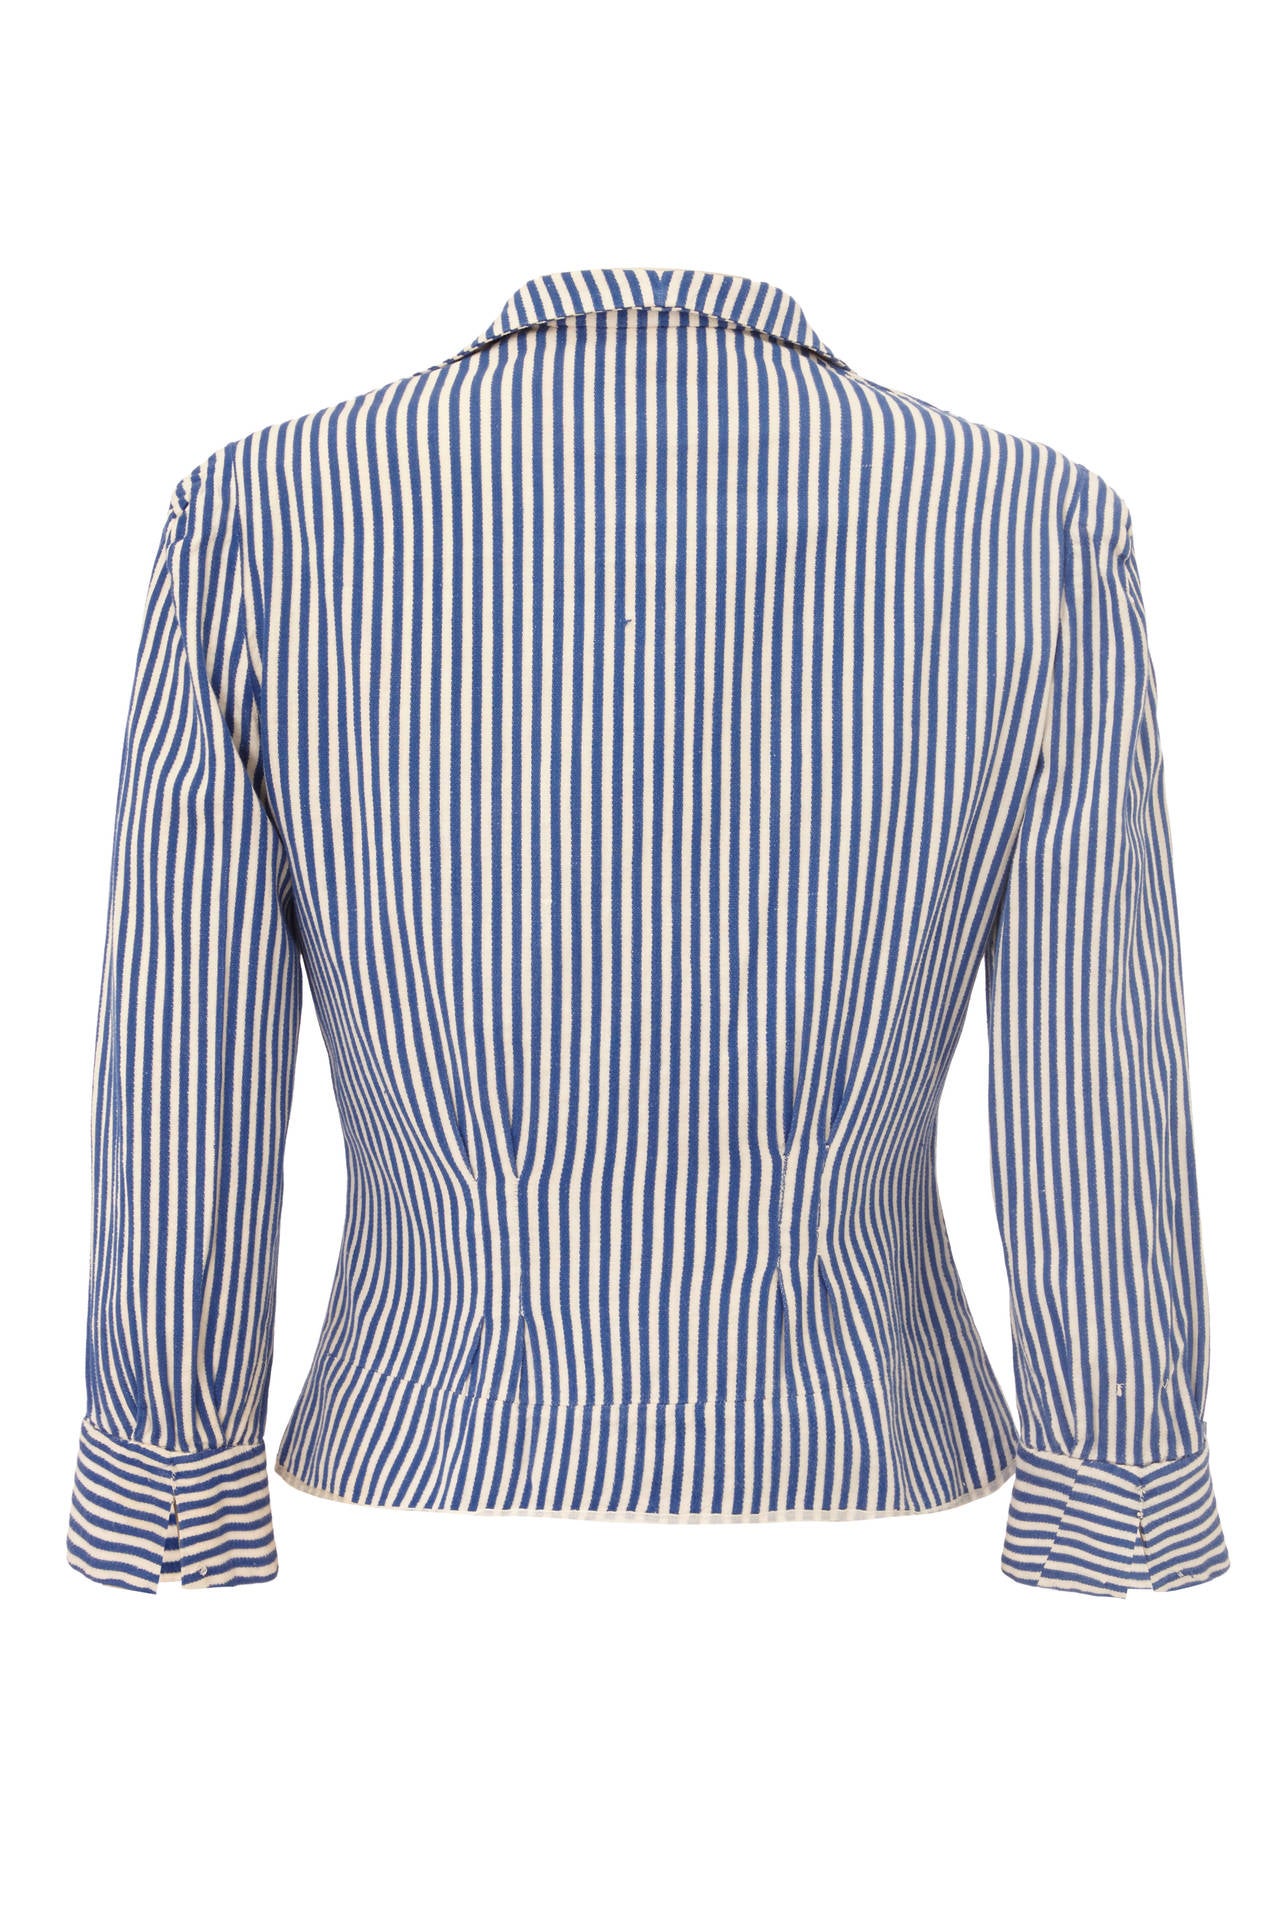 Blue and white striped cotton shirt/ jacket with ¾ sleeves.  It fastens at the front with four clear buttons and is a nice example of early 20th century clothing in very good condition.